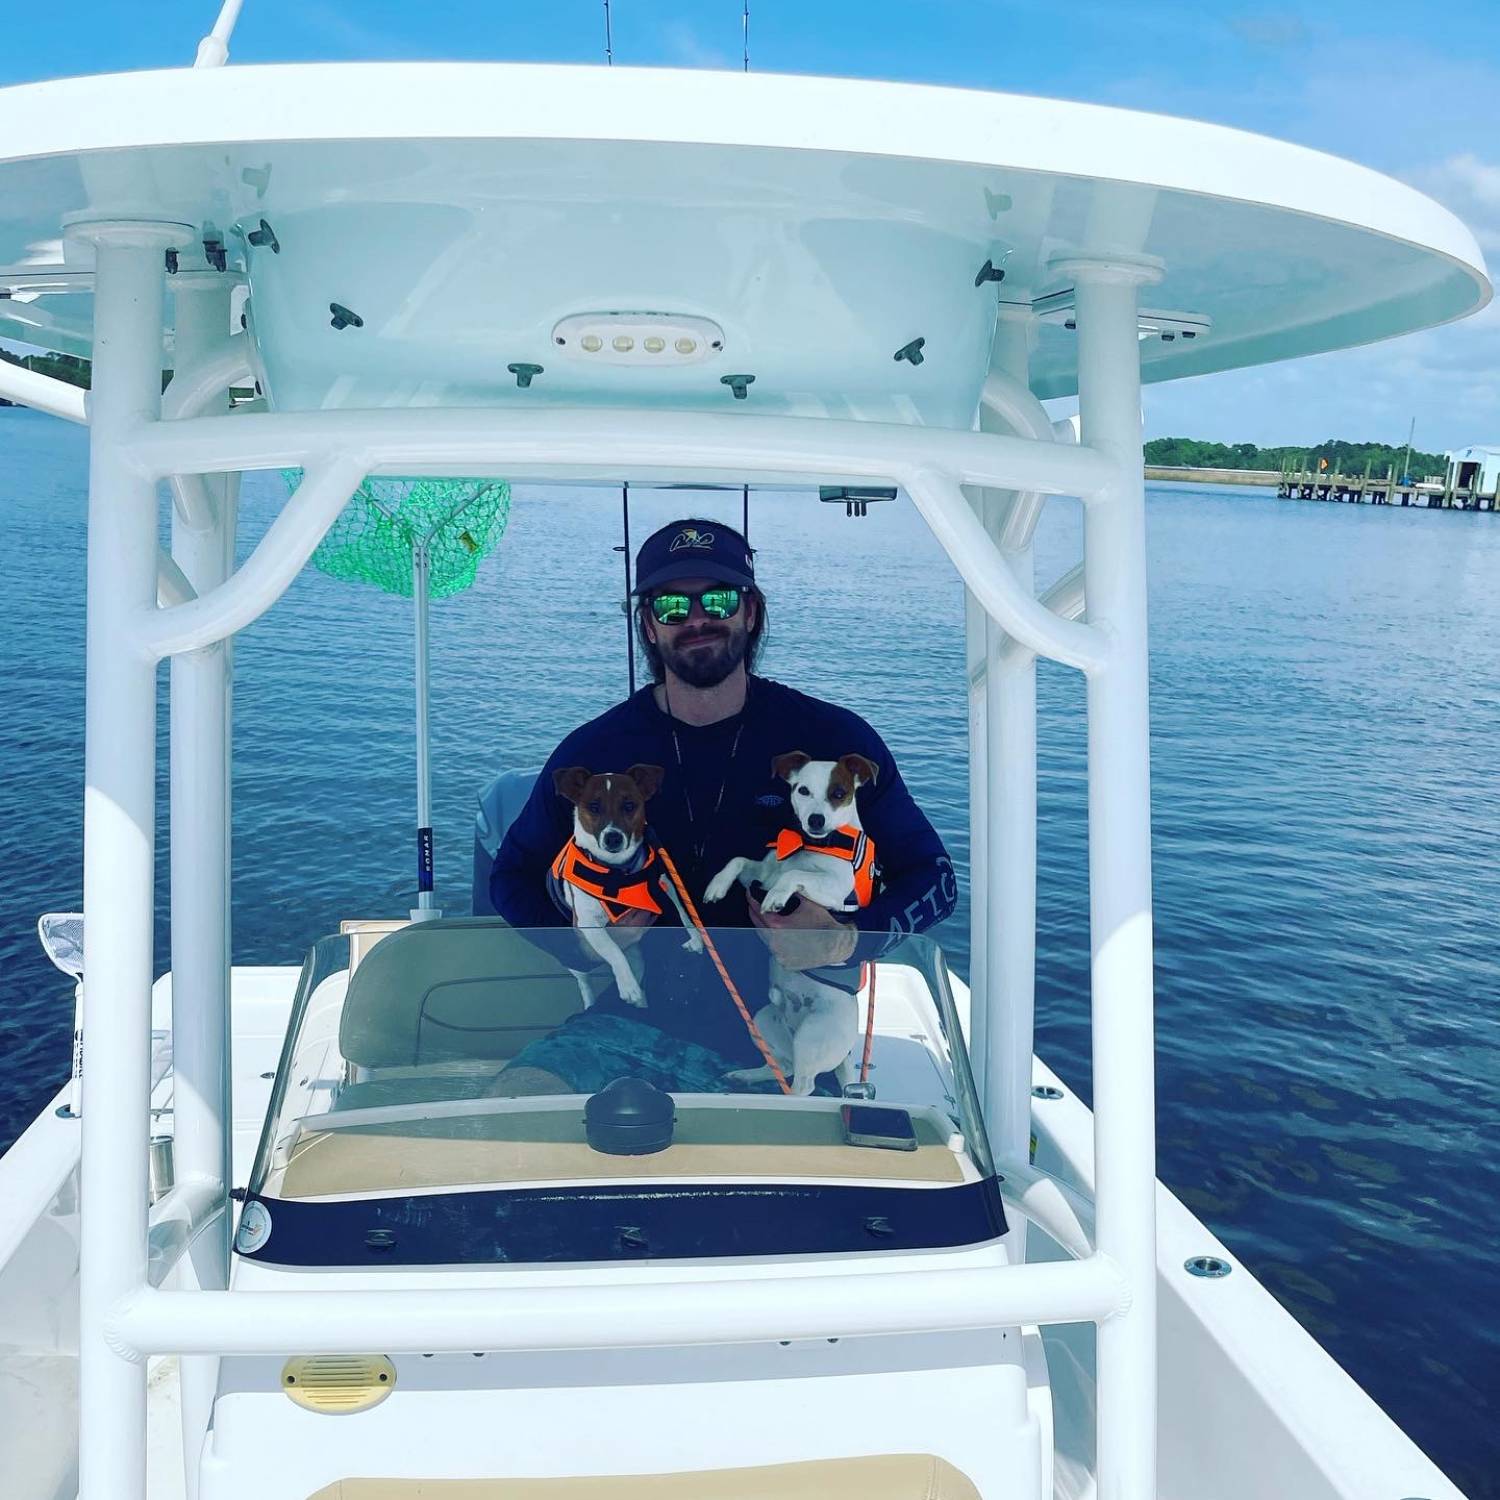 Title: Boat day with the pups - On board their Sportsman Masters 247 Bay Boat - Location: Jacksonville, FL. Participating in the Photo Contest #SportsmanSeptember